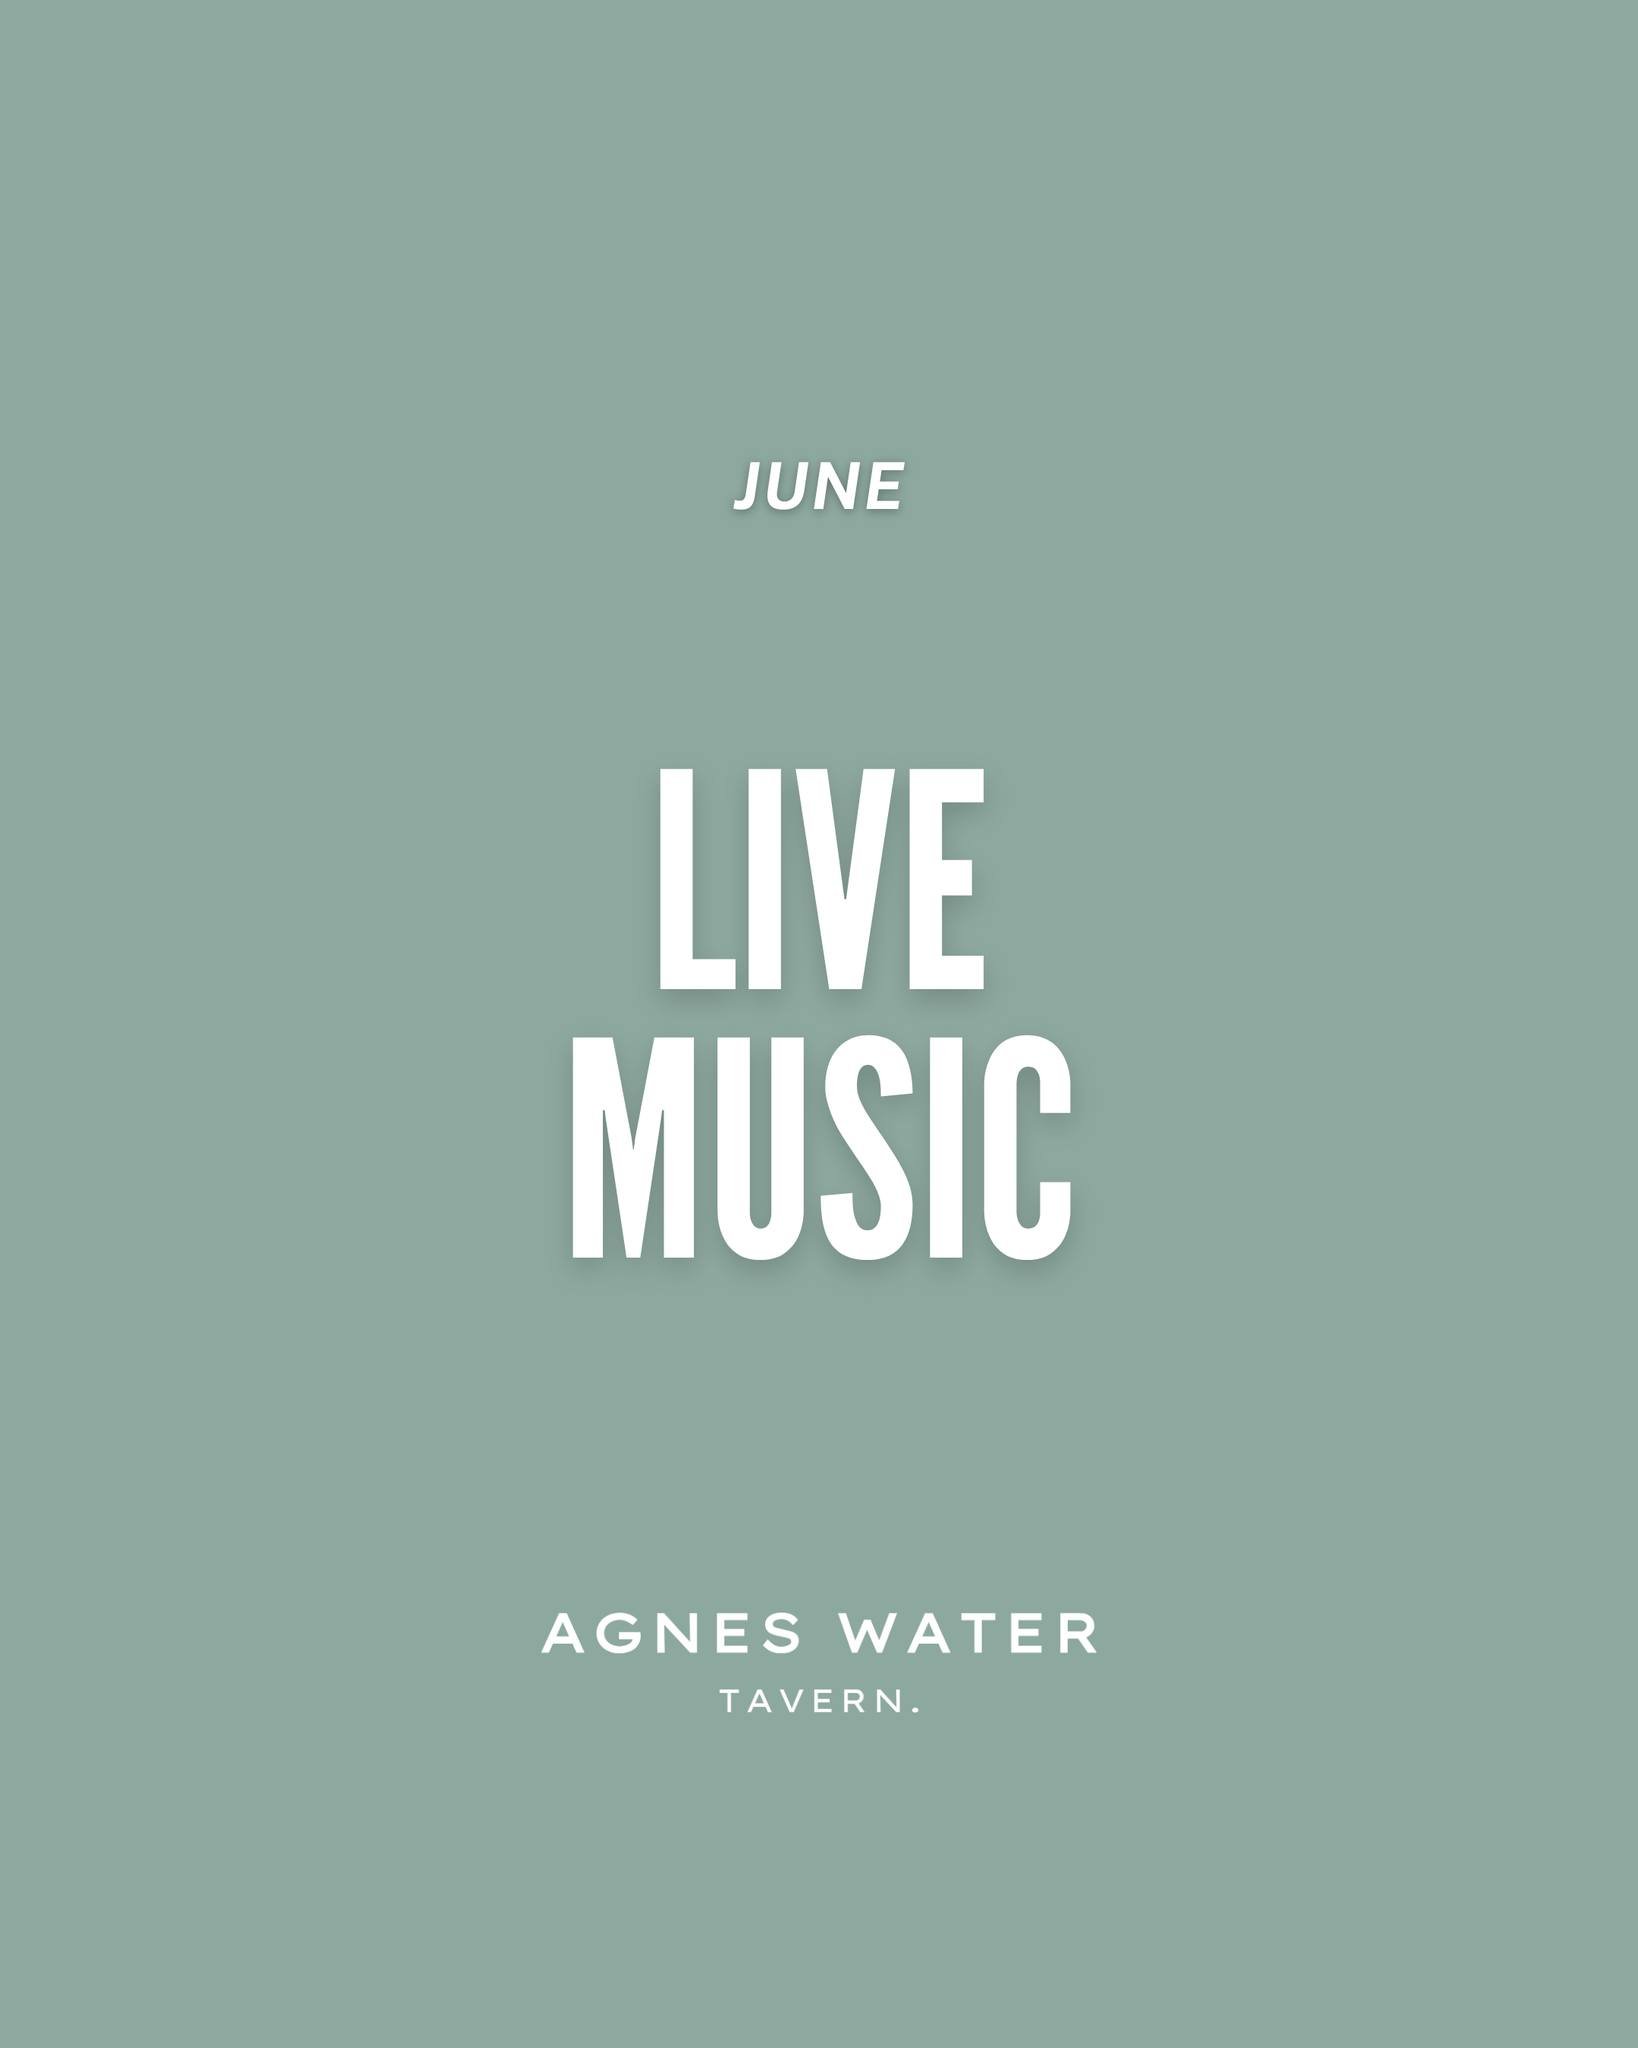 🎵 𝗚𝗲𝘁 𝗿𝗲𝗮𝗱𝘆, 𝗔𝗴𝗻𝗲𝘀 𝗪𝗮𝘁𝗲𝗿! 🎵

June is all set to be a month of unforgettable performances here at Agnes Water Tavern! 🎉

🗓️ 𝙃𝙚𝙧𝙚'𝙨 𝙖 𝙩𝙖𝙨𝙩𝙚 𝙤𝙛 𝙬𝙝𝙖𝙩'𝙨 𝙩𝙤 𝙘𝙤𝙢𝙚:
🎤 1st June: 8pm - Todd Keightley
🎤 7th June: 